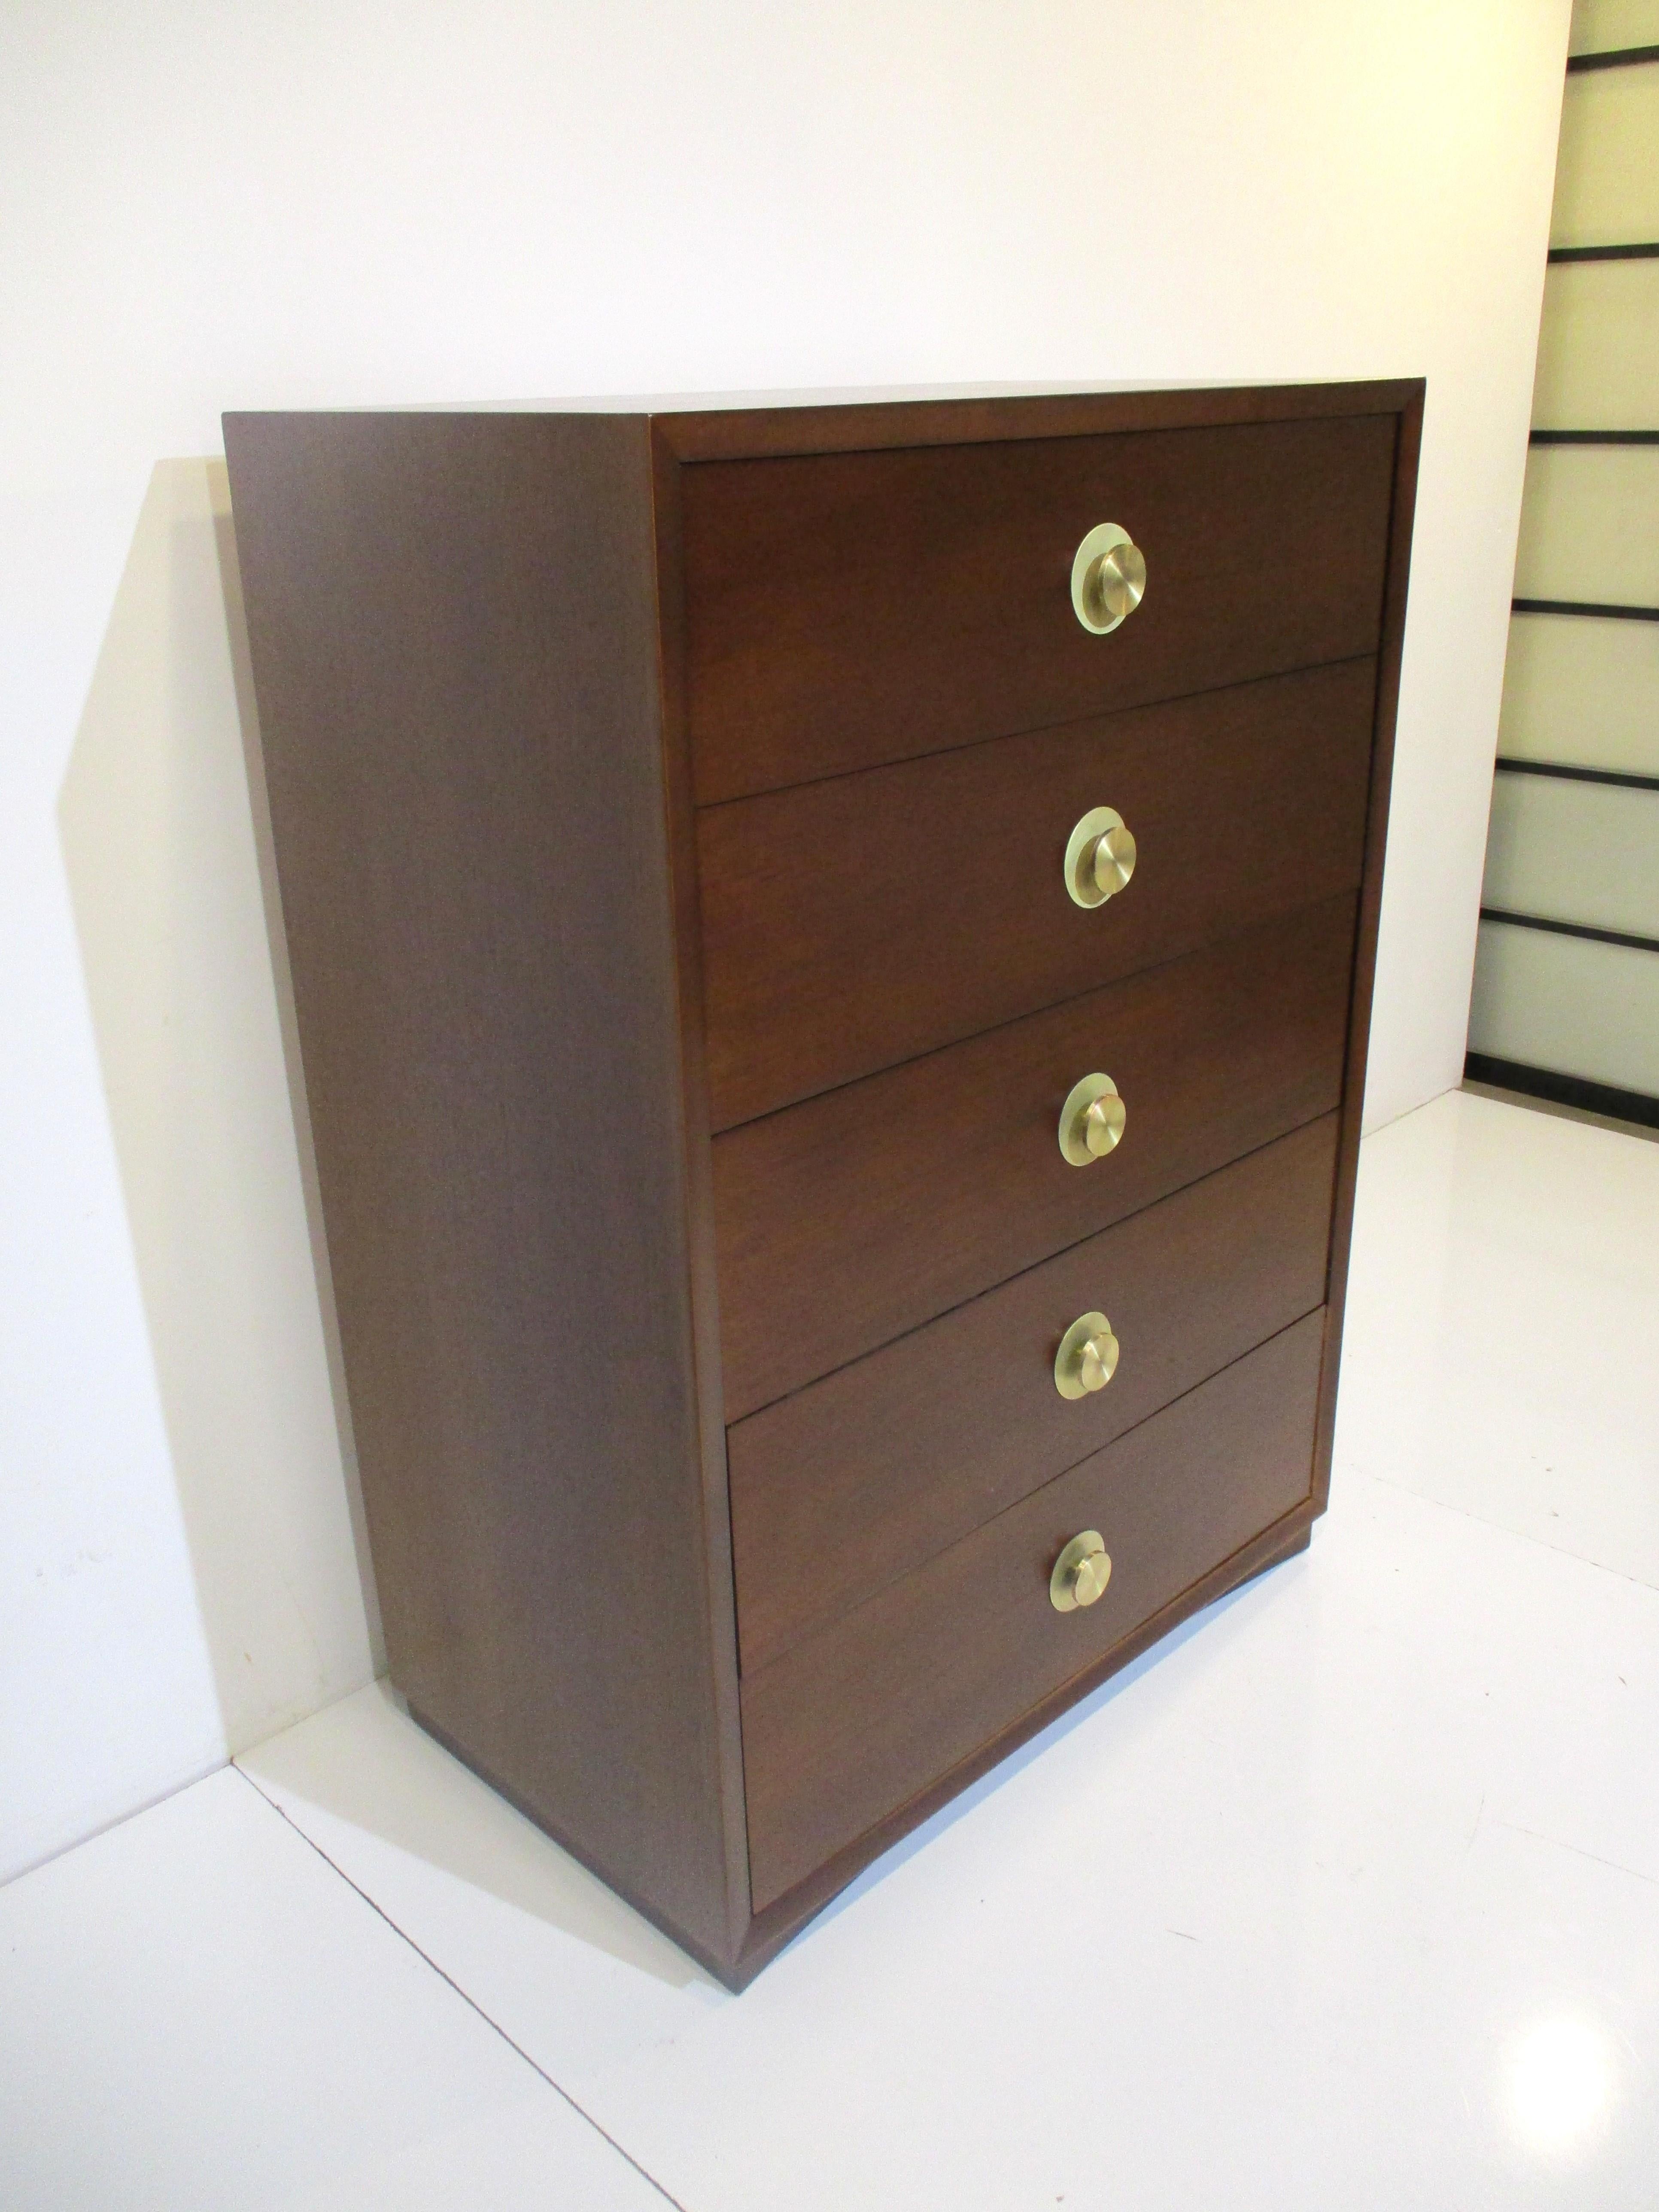 A very well crafted dark walnut toned tall dresser chest with five drawers the top two having dividers. The round brass cast styled pulls with backing plate give the piece a classic look manufactured in the style of the Widdicomb furniture company